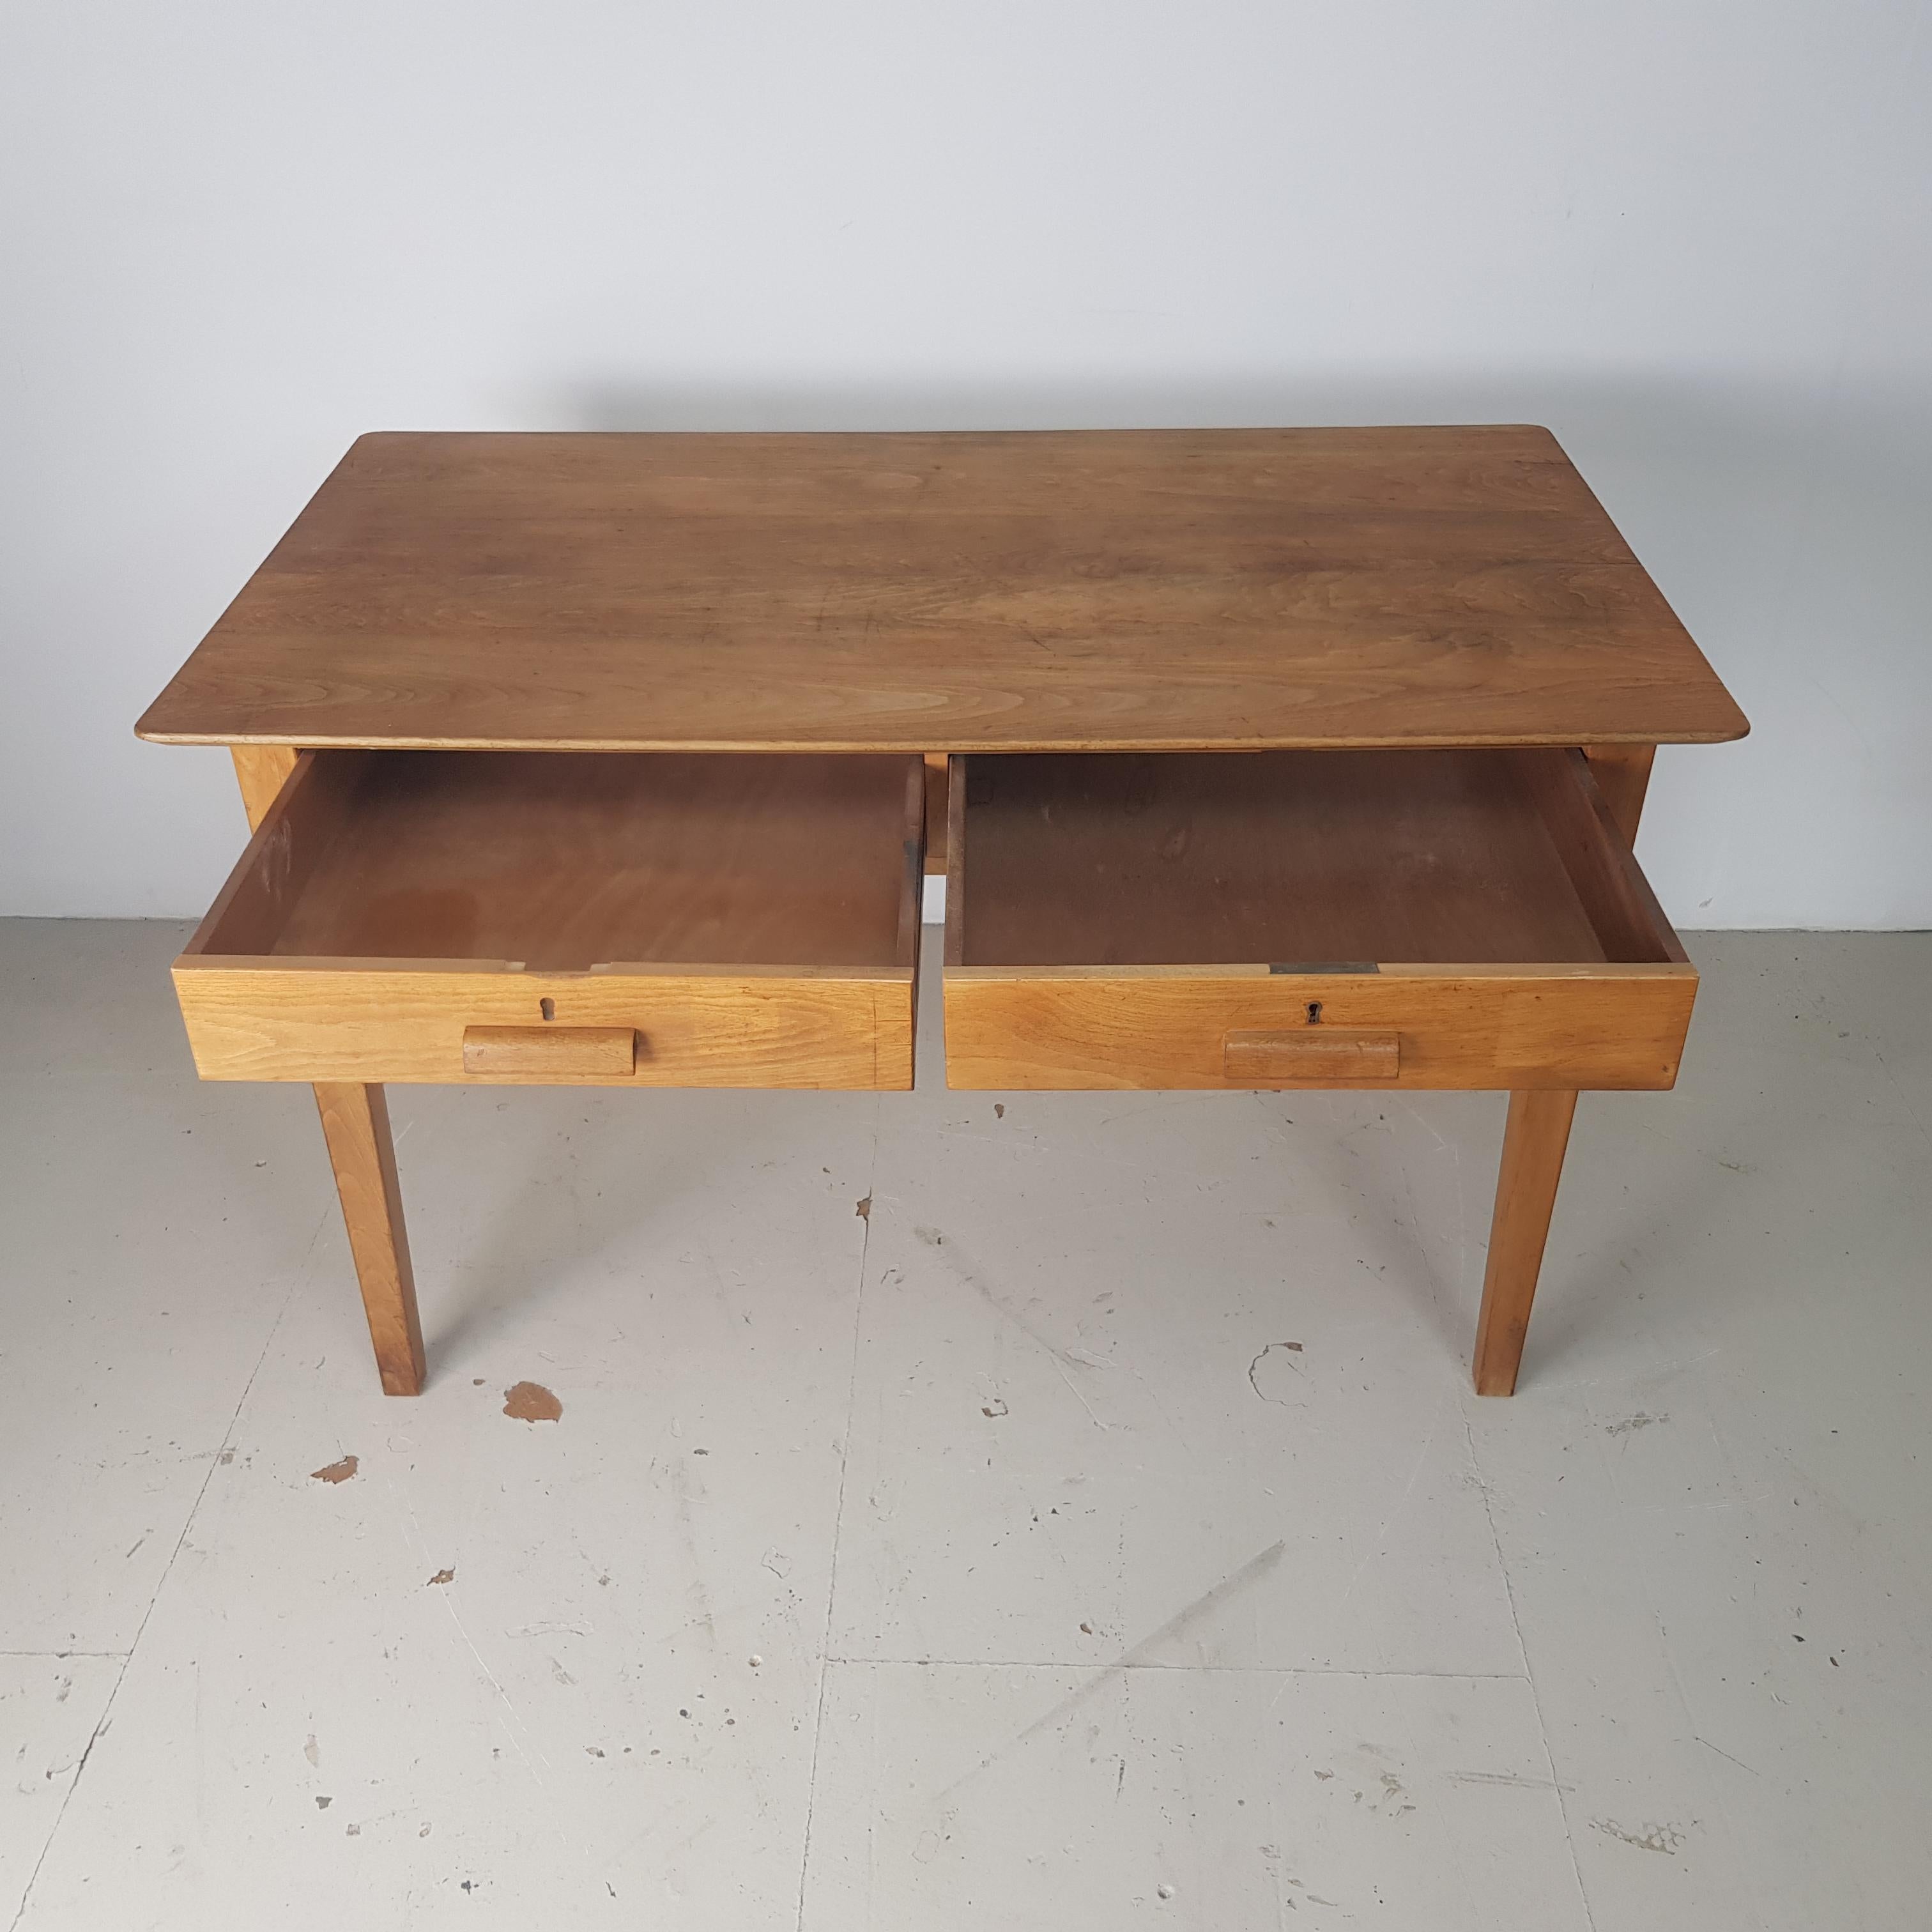 2 drawer beech Esavian desk from the 1950s, with original wooden handles.

Approximate dimensions:

Height: 76cm

Width: 122cm

Depth: 69cm

Drawers: 47cm W x 48cm D x 8cm H.

Knee height 61cm.

In good vintage condition, with marks as